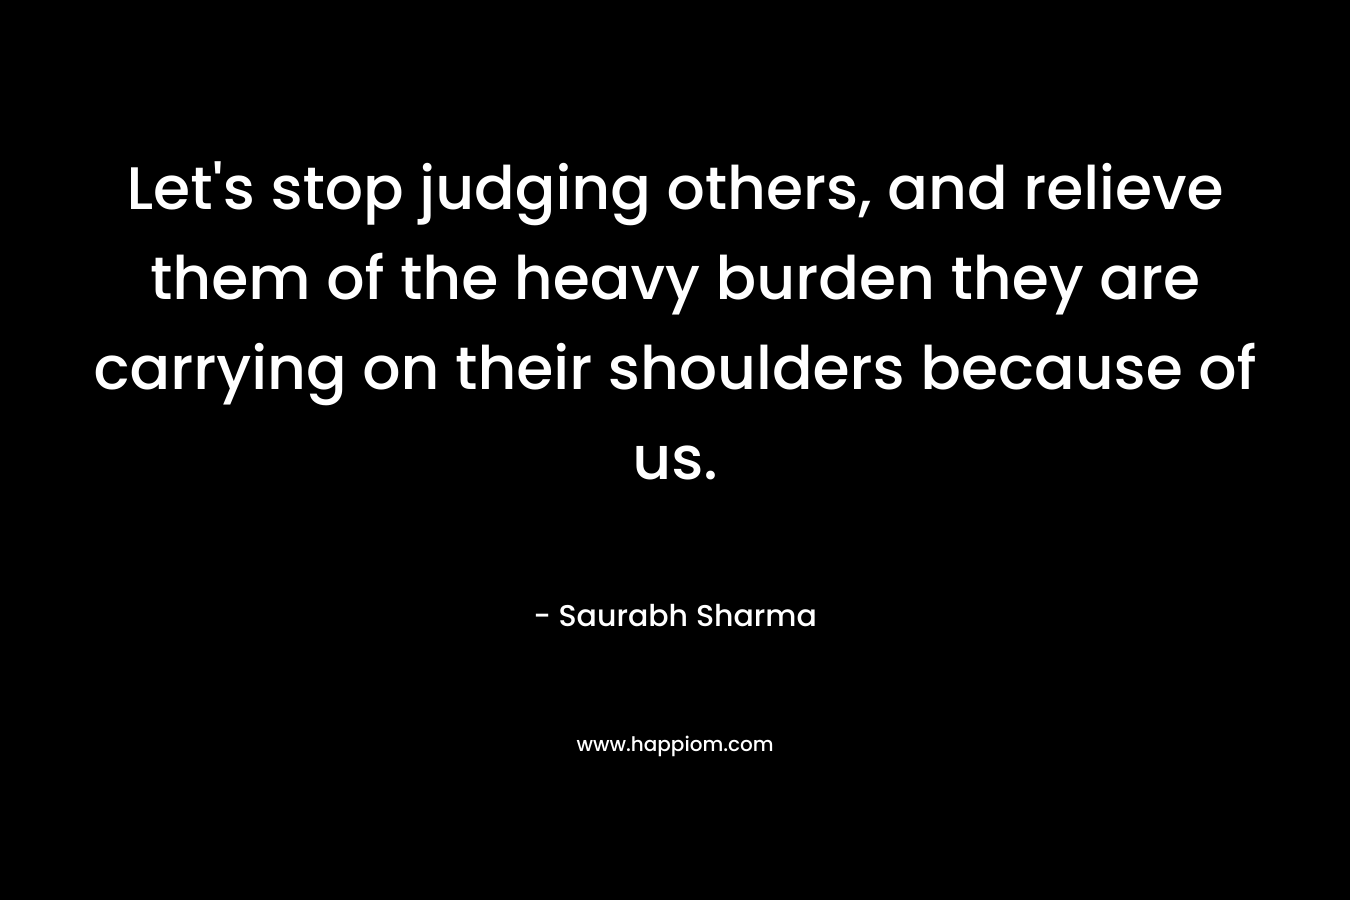 Let's stop judging others, and relieve them of the heavy burden they are carrying on their shoulders because of us.